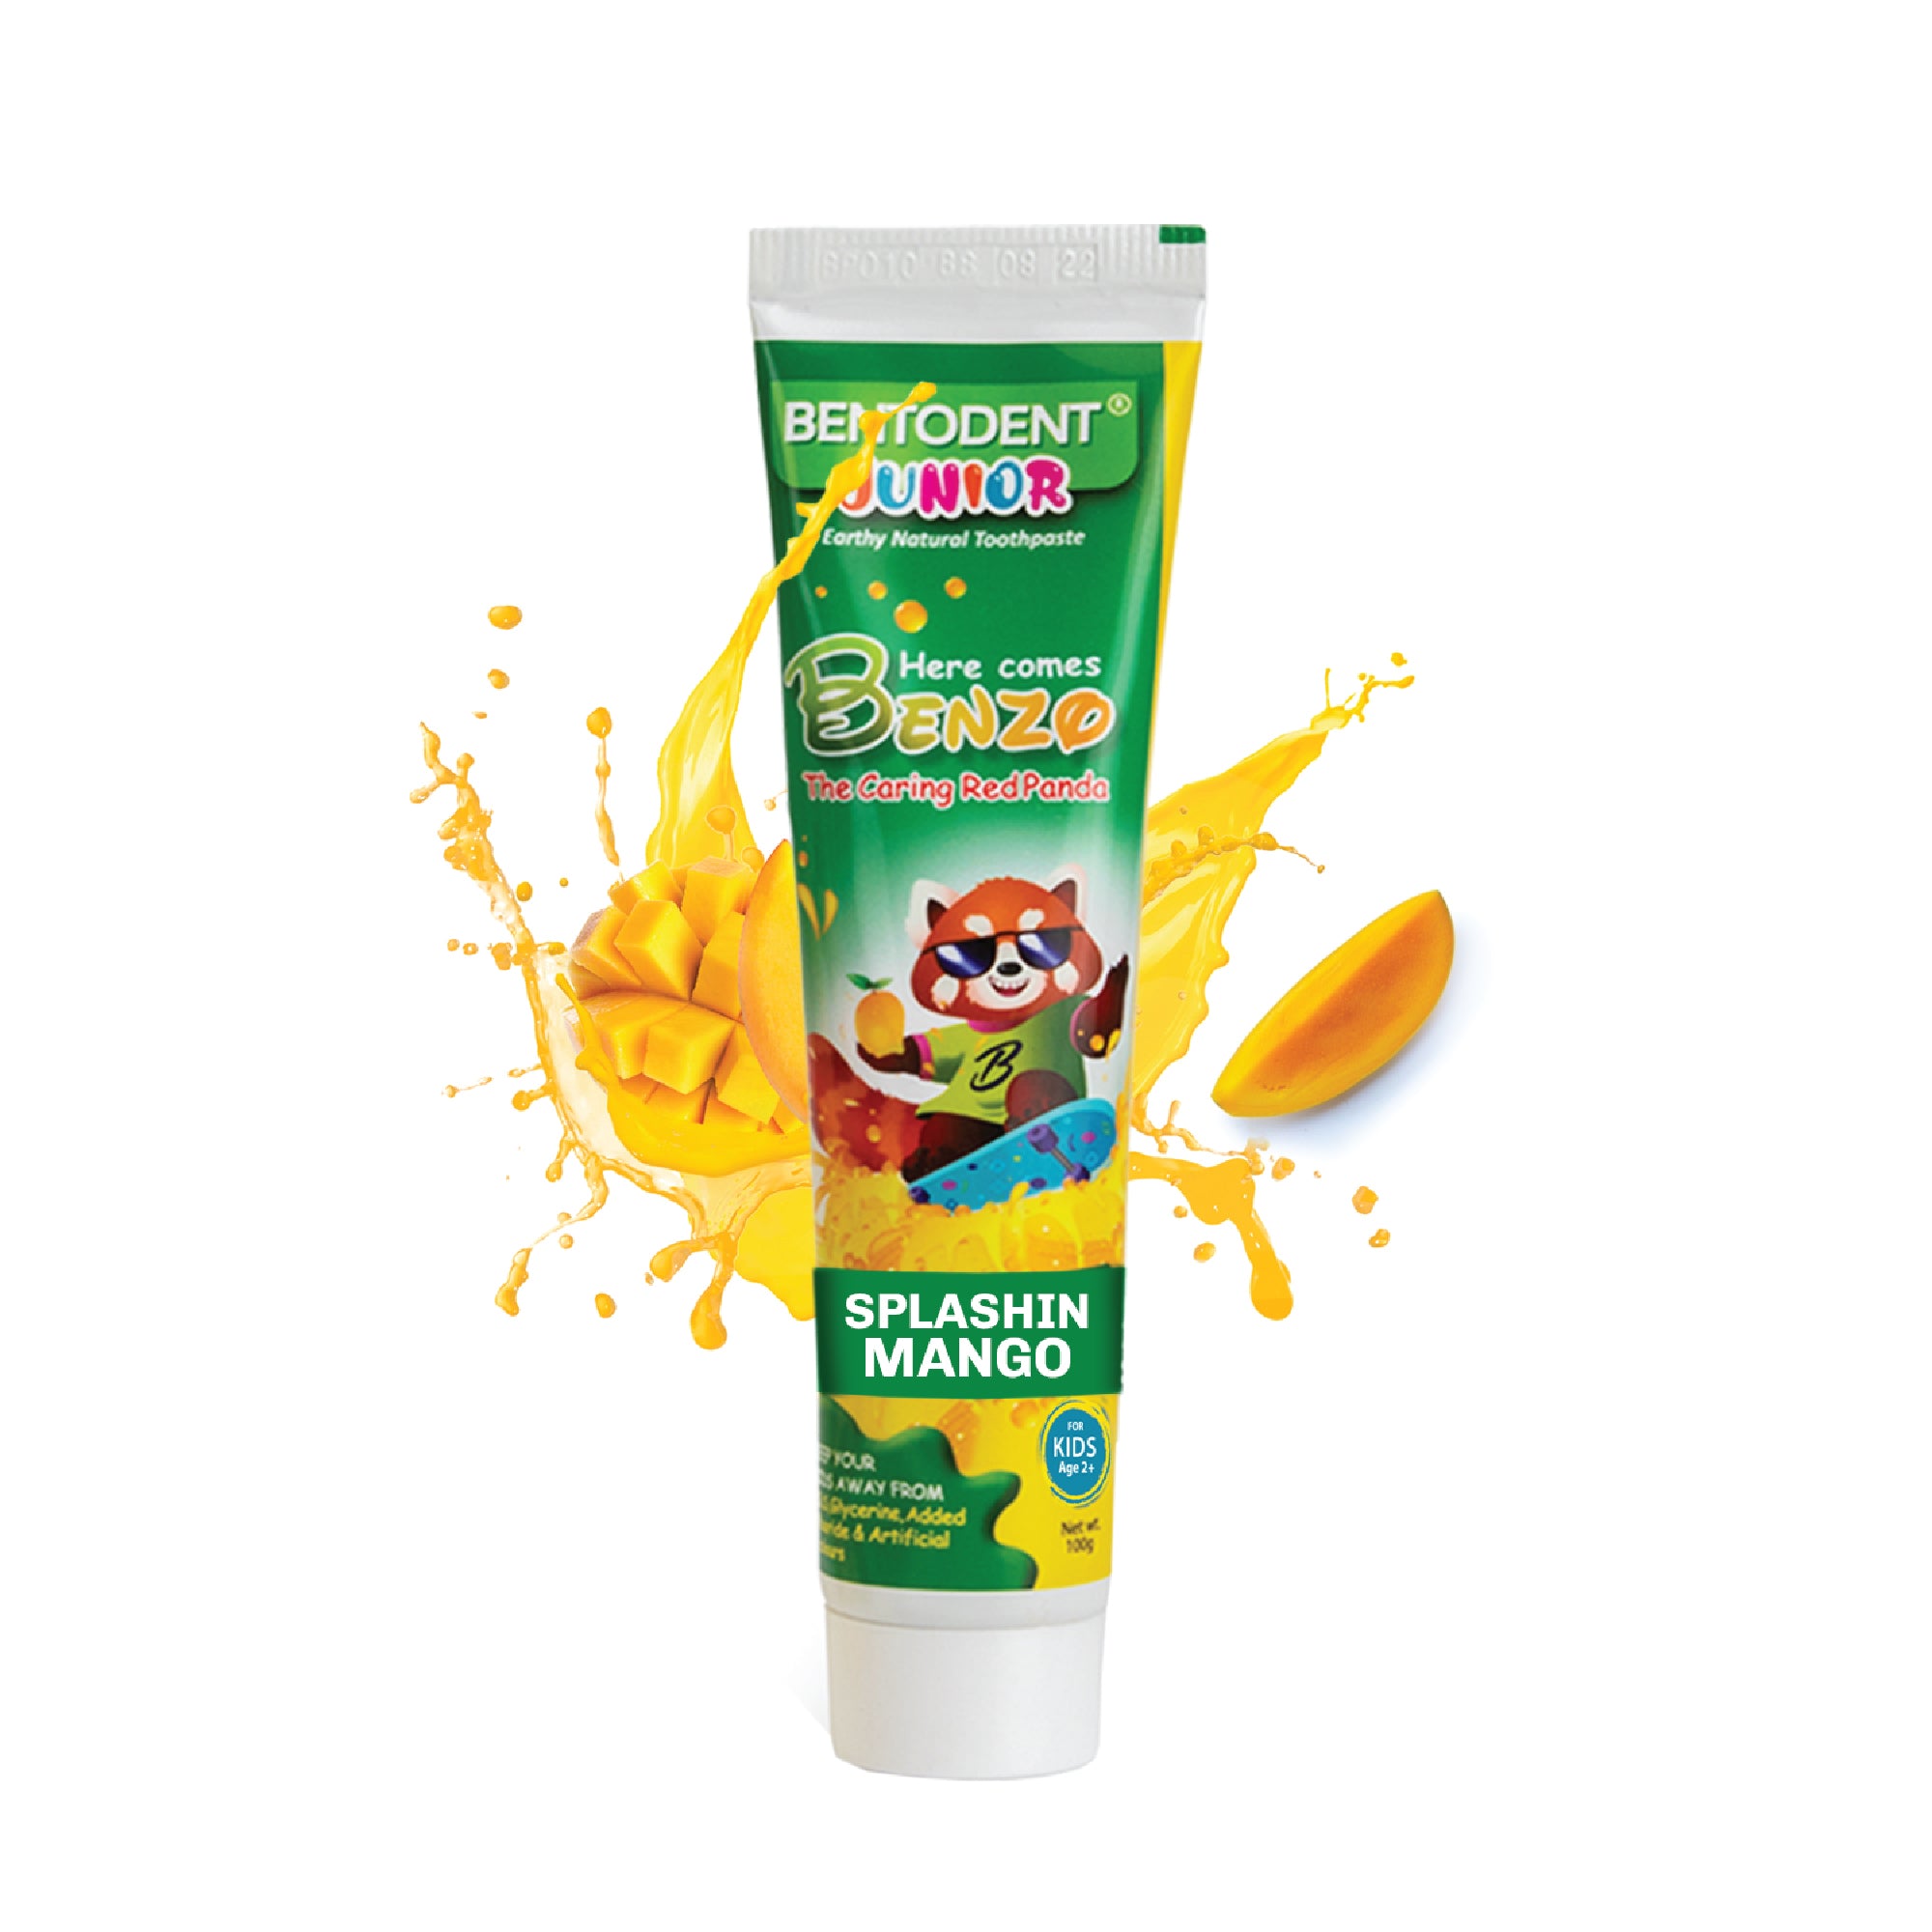 Bentodent 100% Natural Kids Splashin Mango Toothpaste, Fluoride Free,  Sls Free, Complete oral care protection for kids, Fresh Breath, Best toothpaste for kids 2+ years 100g - Indian Dental Organization